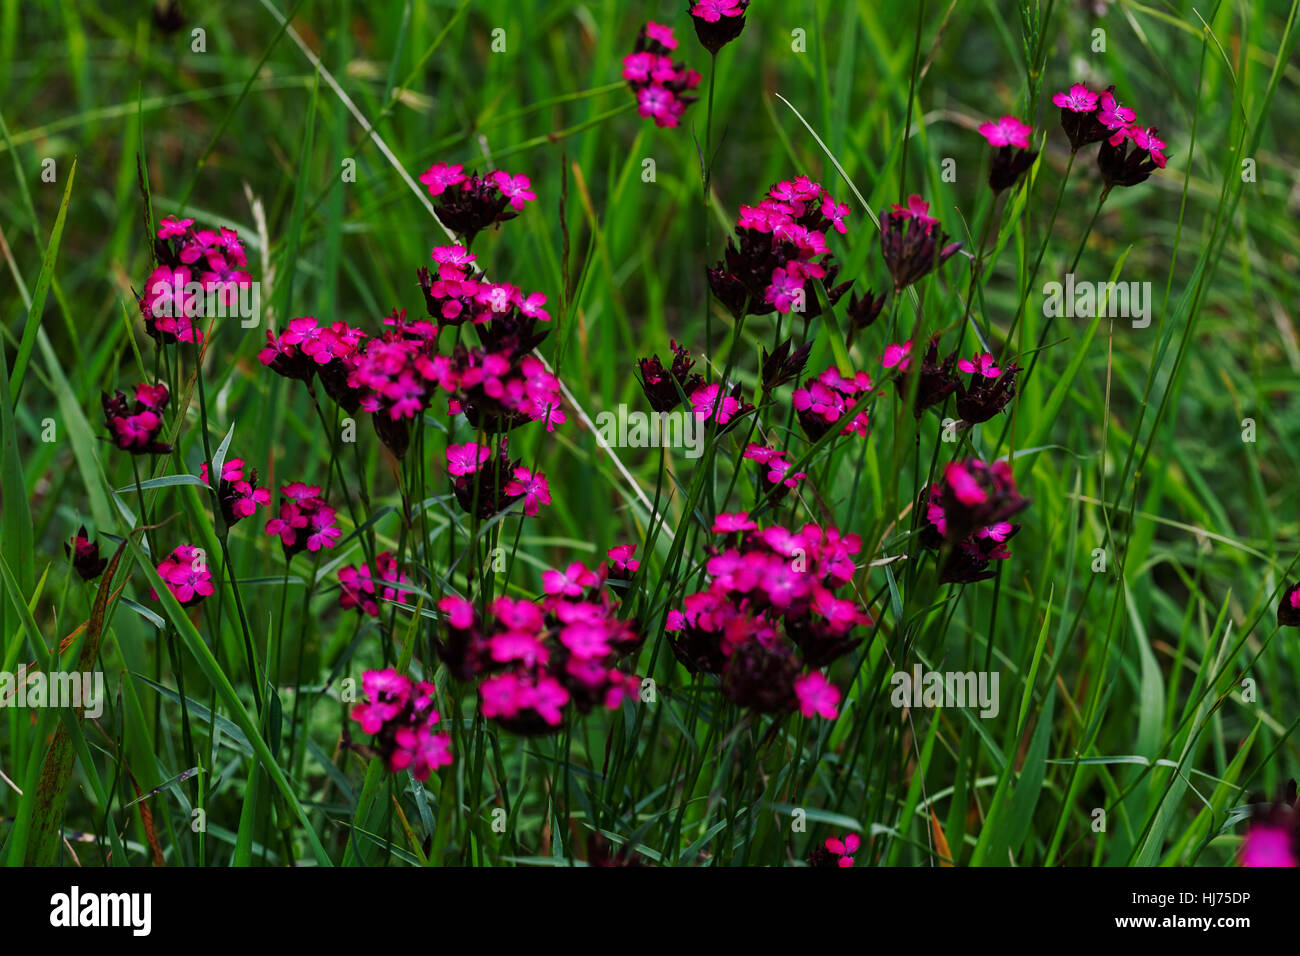 wild carnations bloomed in the grass, note shallow depth of field Stock Photo